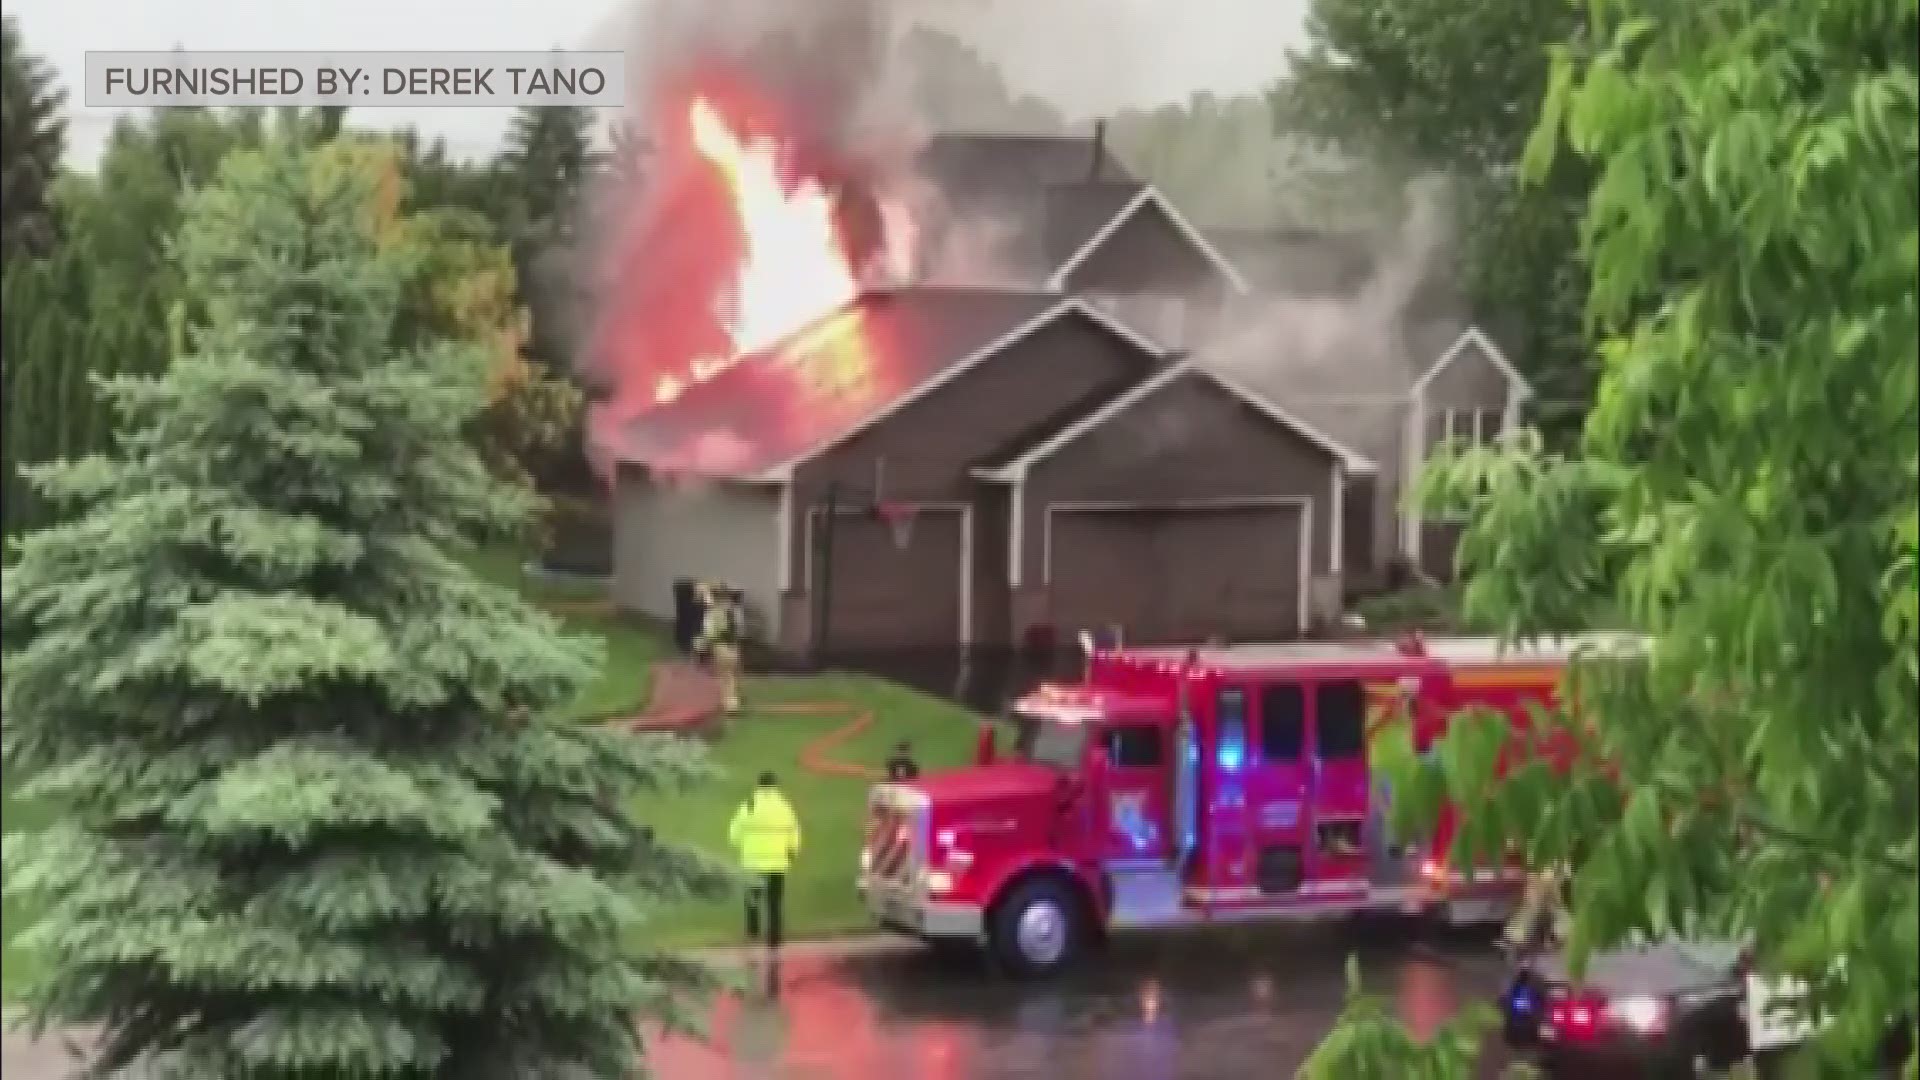 Lightning is being blamed for at least four house fires in Lakeville Tuesday, including this one captured by viewer Derek Tano.